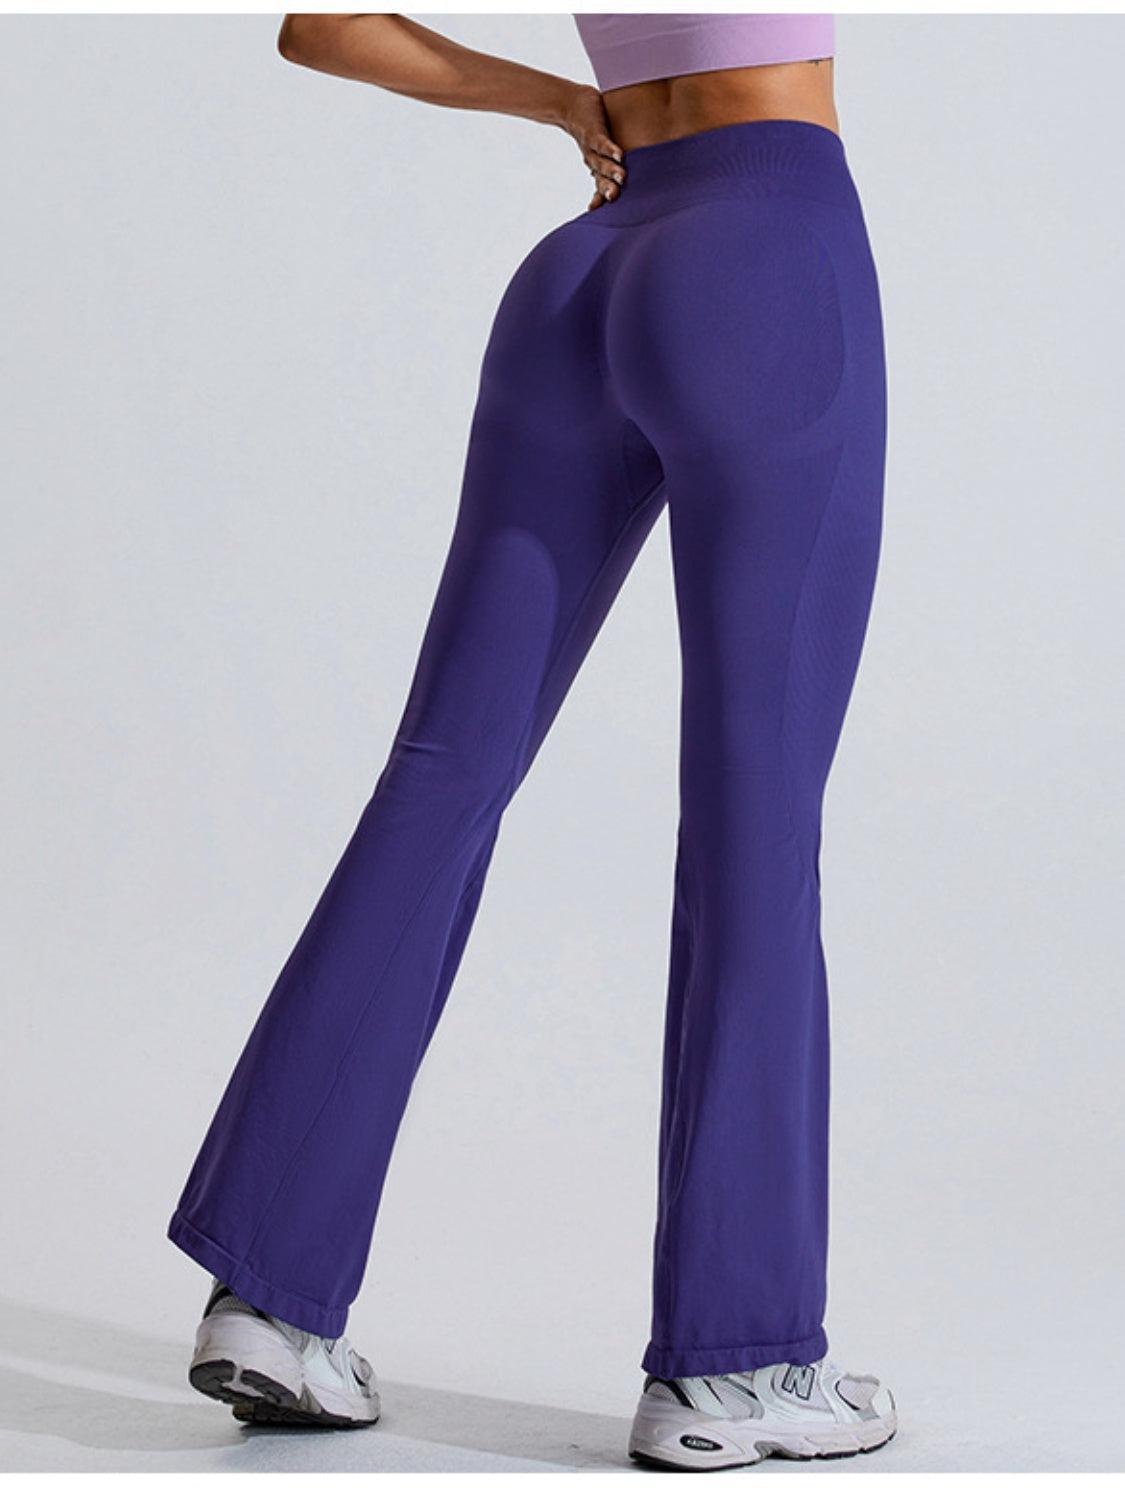 a woman in a purple top and purple pants